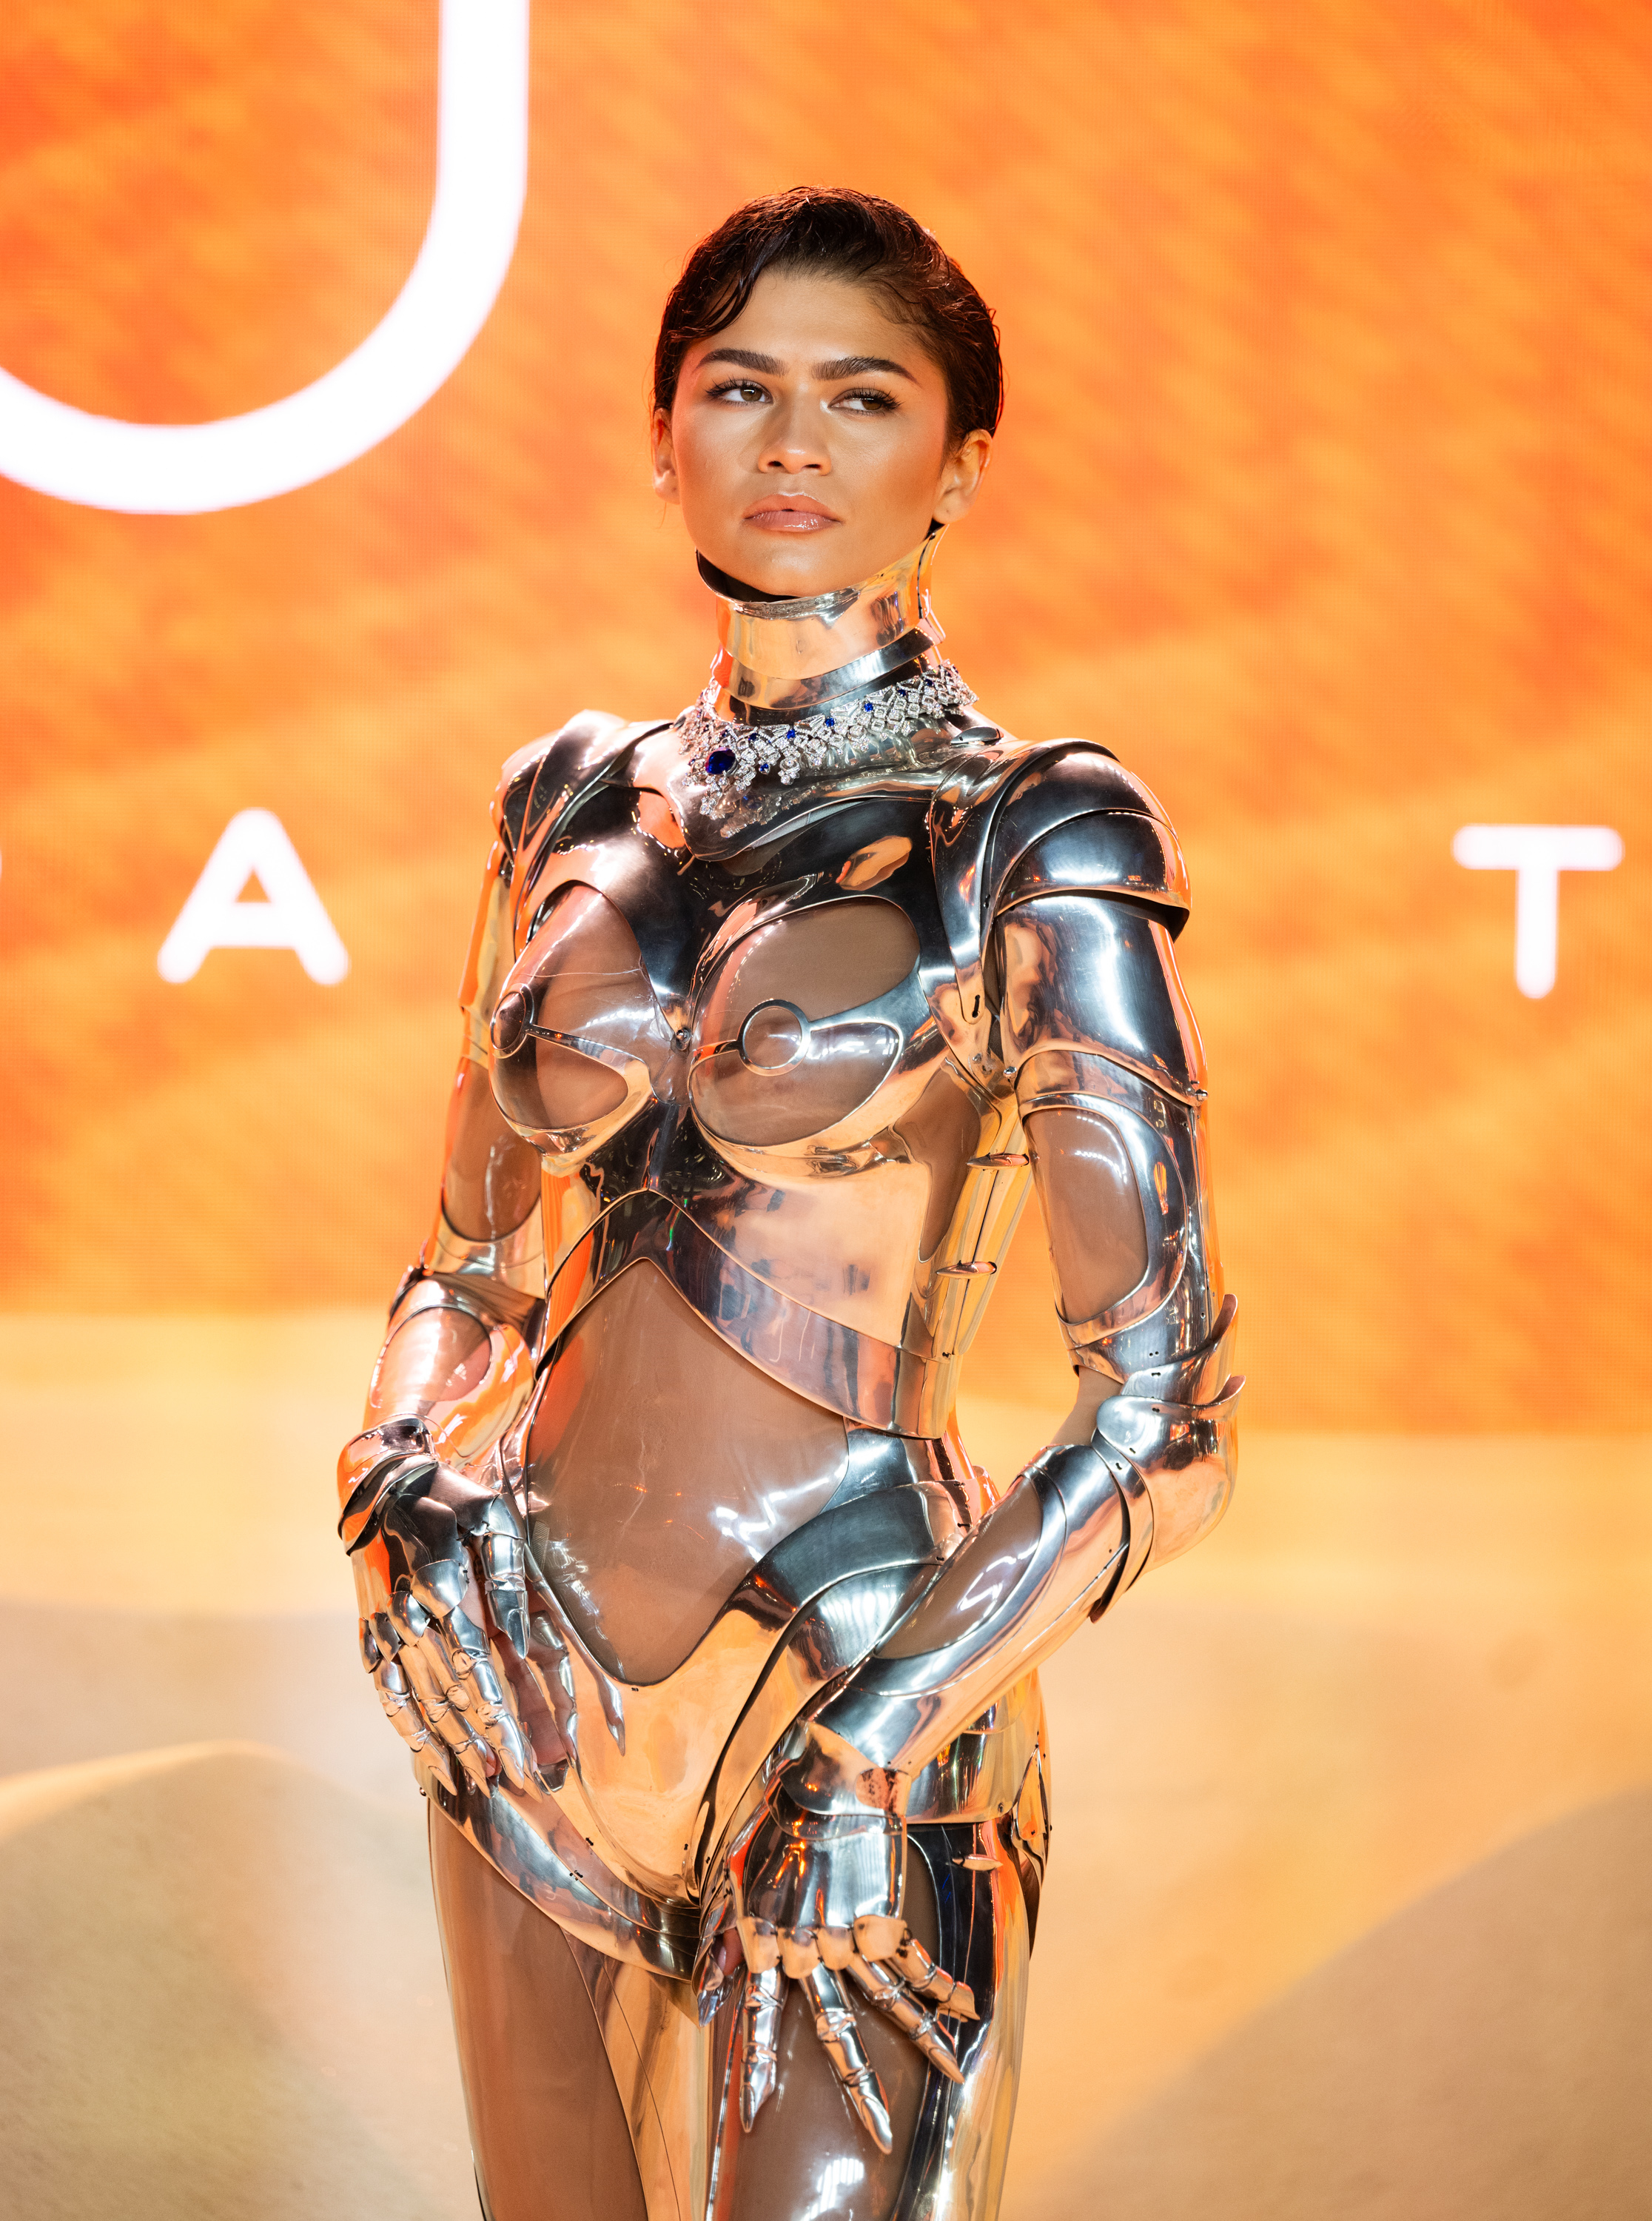 Zendaya in a futuristic metallic outfit posing at an event with an orange backdrop